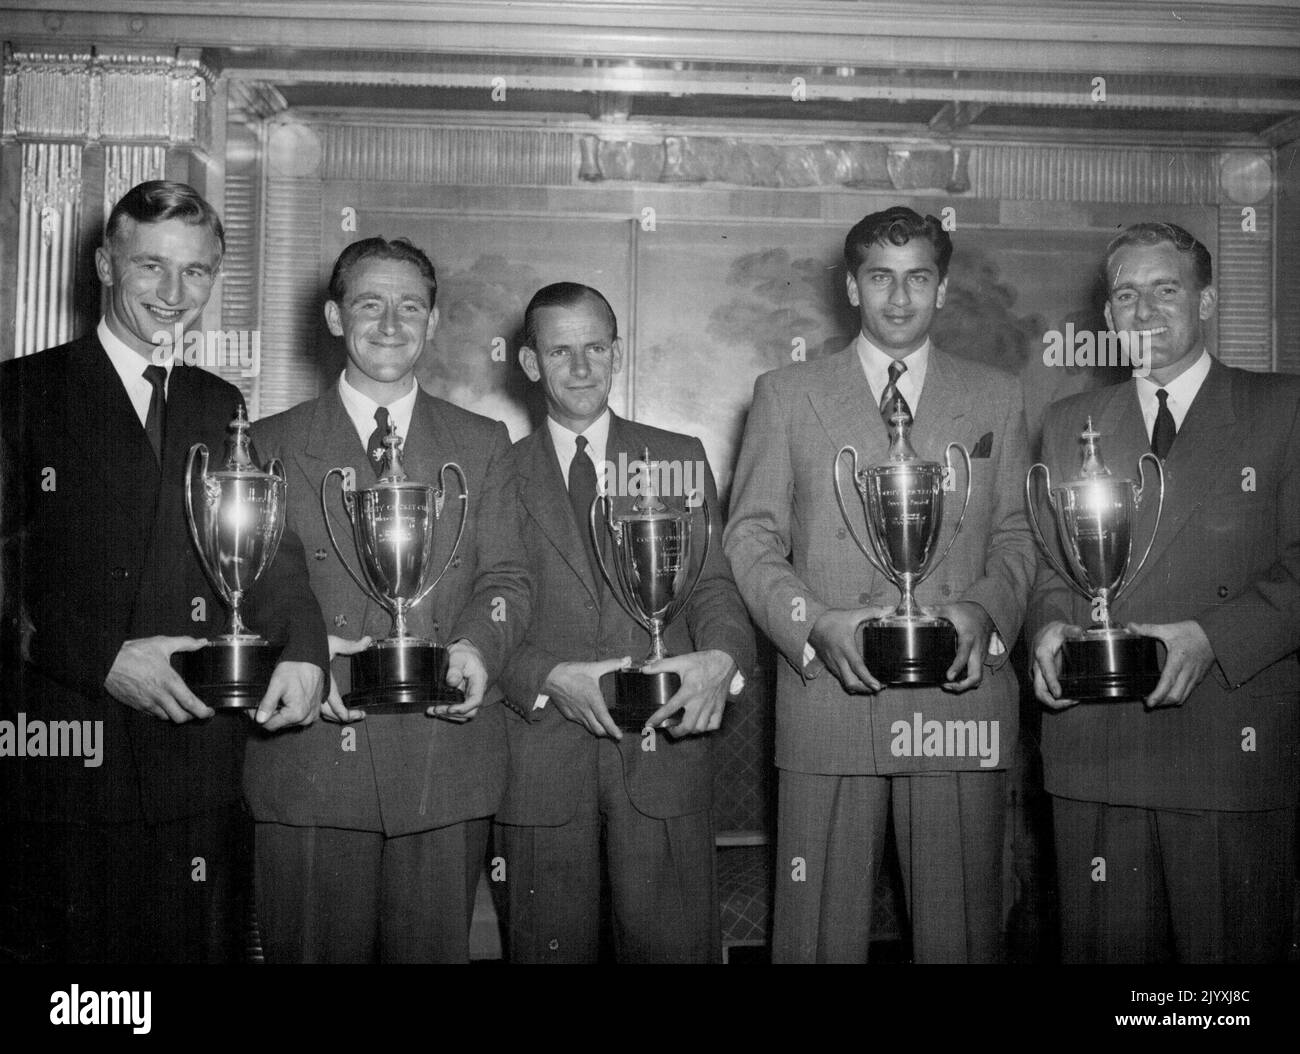 Top Cricketers -- Five of the Season's best cricketers hold the 'County' cups after the presentation at the Dorchester Hotel, Park Lane, London, to-night (Monday). Left to right - C.A. Milton of Gloucestershire (Fielding, with the highest number of catches; 44): H.W. Stephenson (Somerset, trophy winner for wicket-keeping; he claimed 86 victims): G.M. Emmett (Gloucestershire; he made the fastest century of the season - in 84 minutes): Fazal Mahmood (received a special cup for the year's outstanding performance, in Pakistan's first Test win against England when he had a match analysis of 12 wick Stock Photo